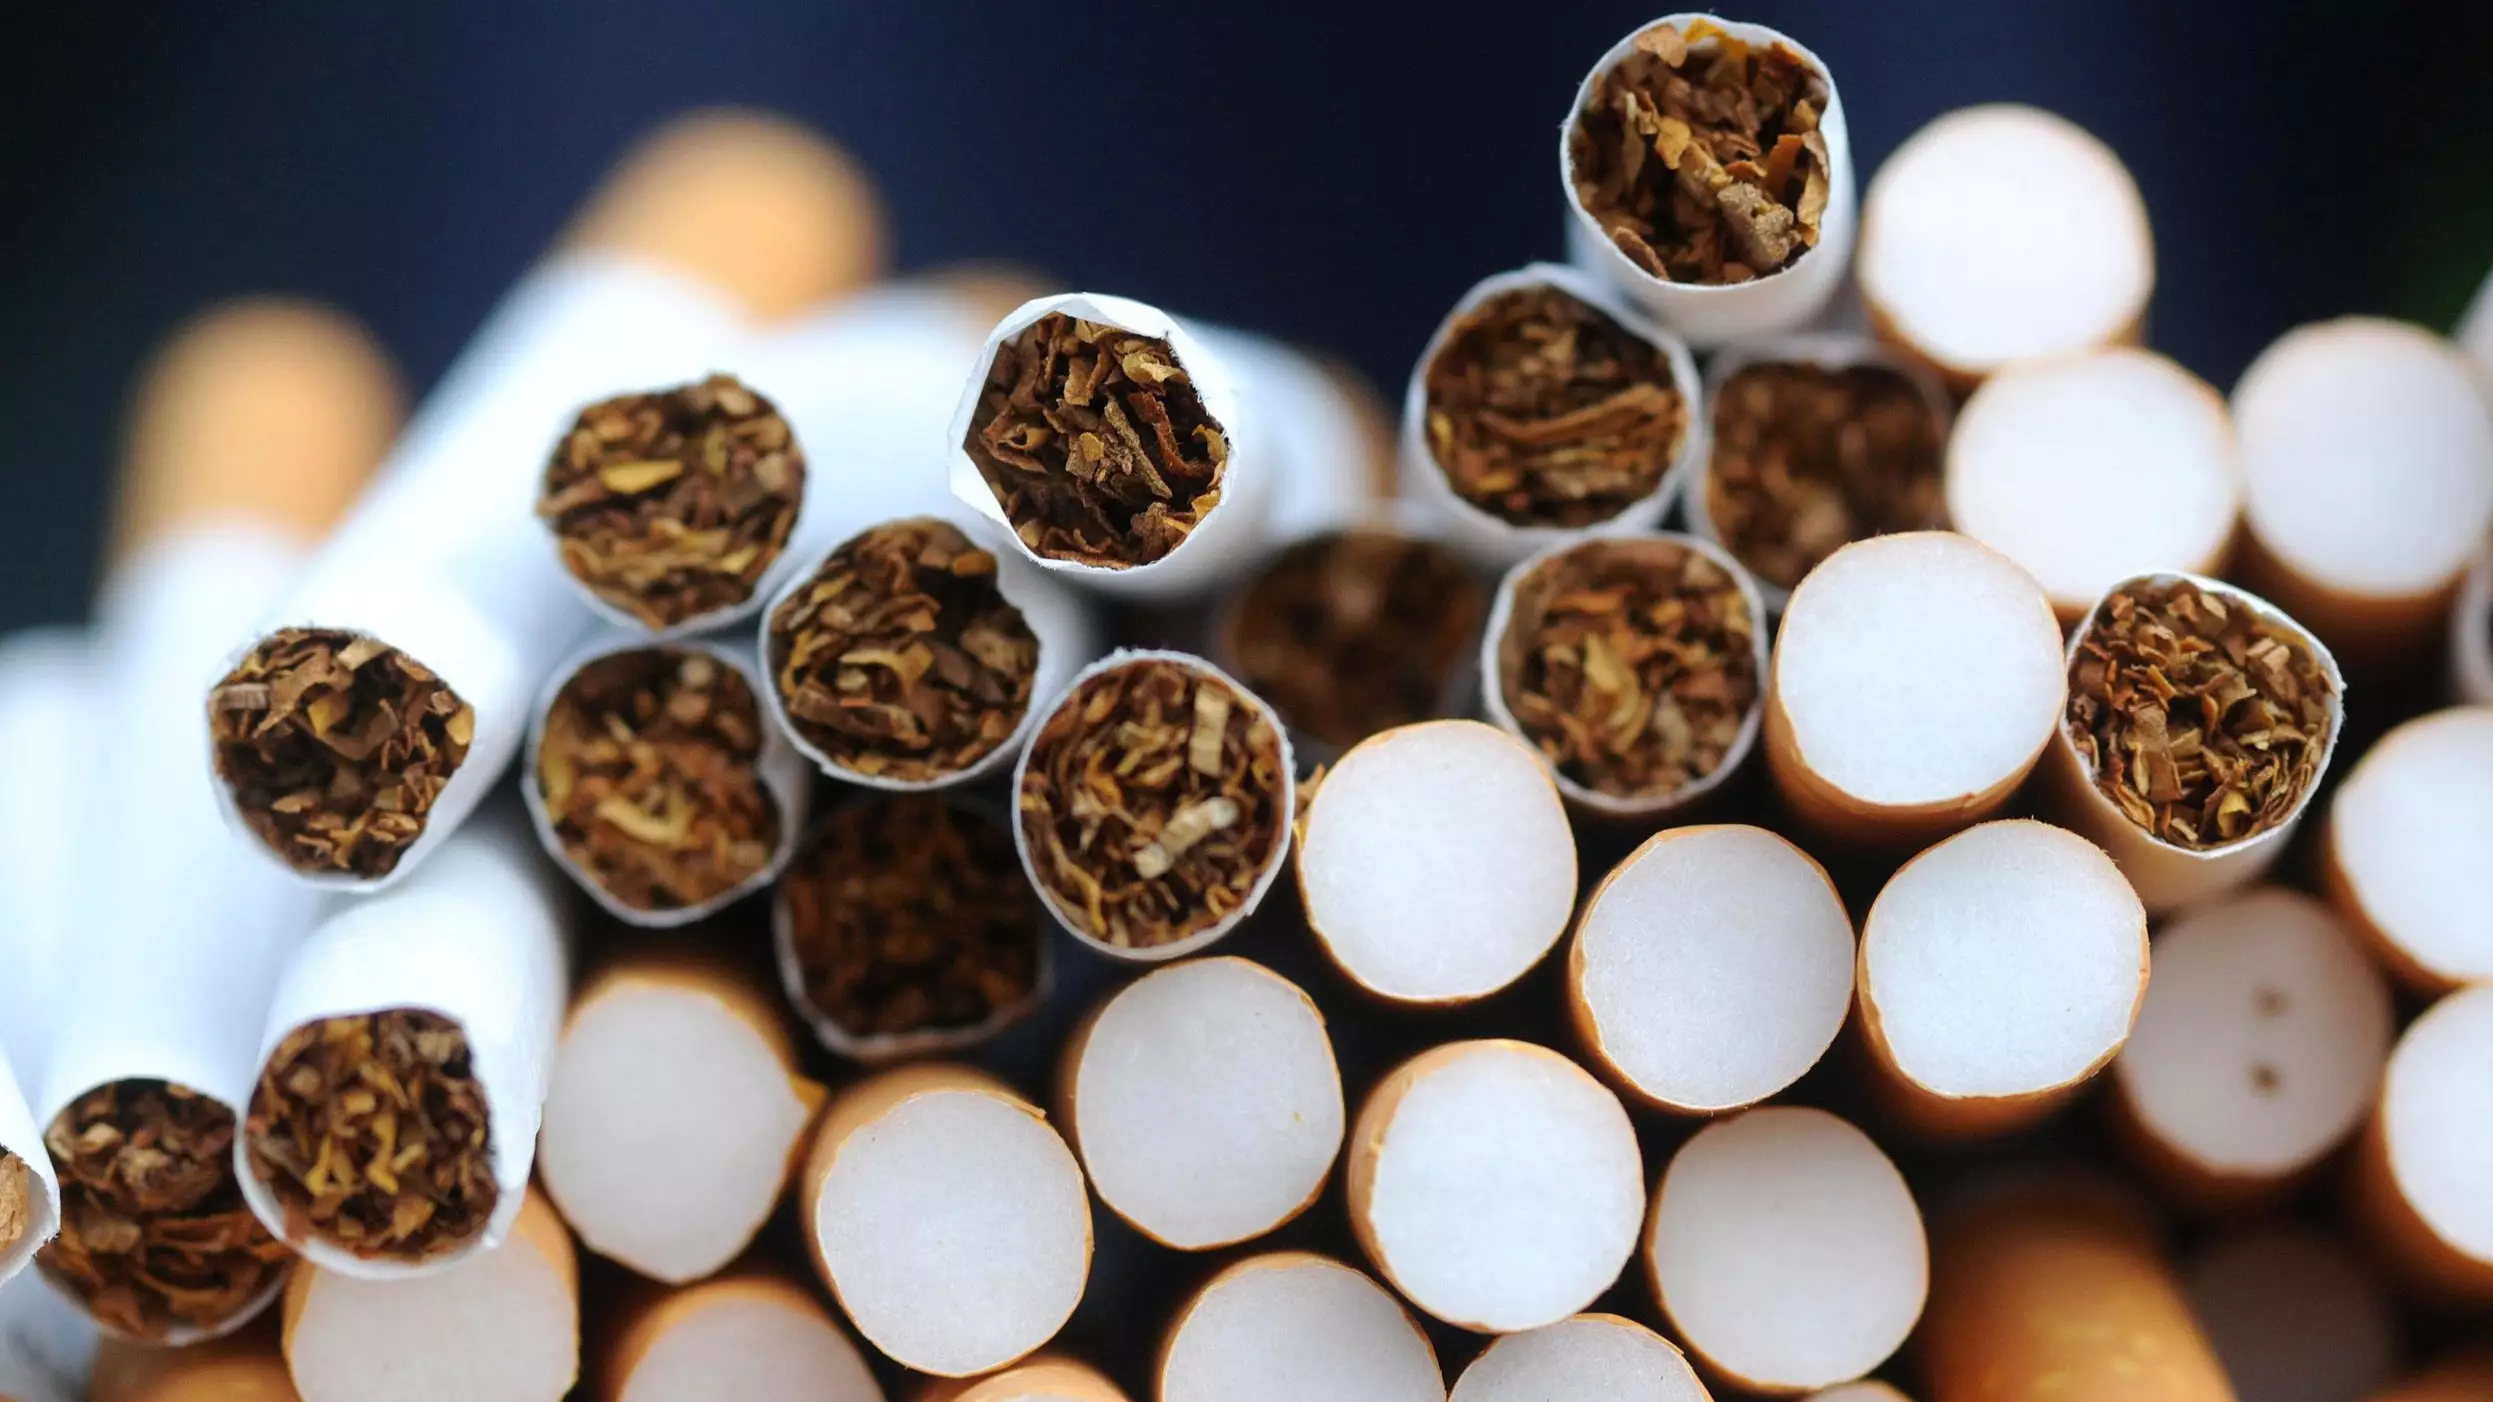 US Set To Lower Nicotine Levels In Cigarettes To Make Them Less Addictive